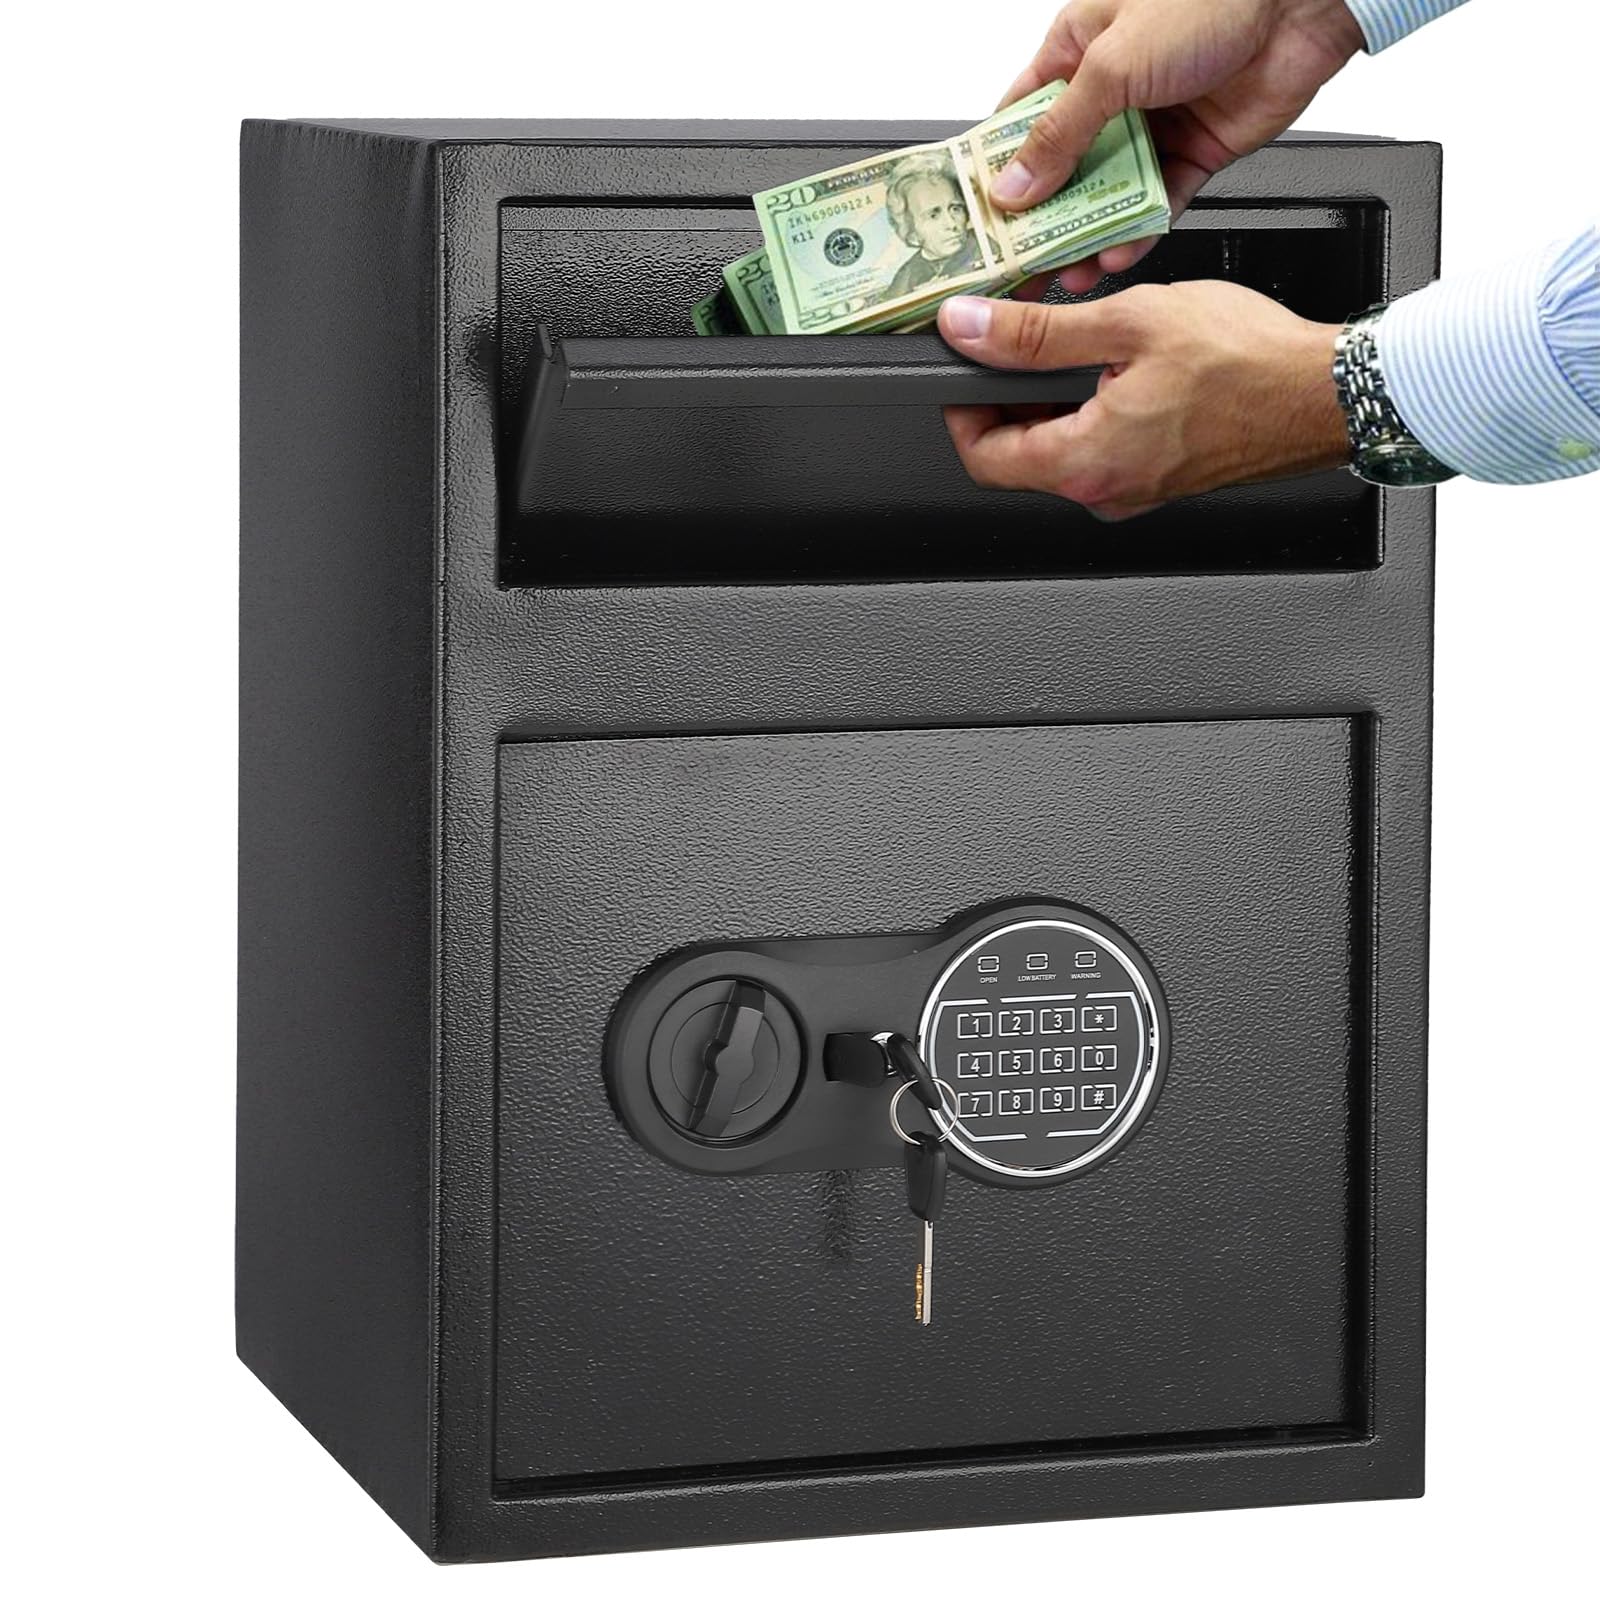 Depository Safe Digital Depository Safe Box, Electronic Steel Safe with Keypad, Locking Drop Box with Slot, Metal Lock Box with Two Emergency Keys for Your Valuables